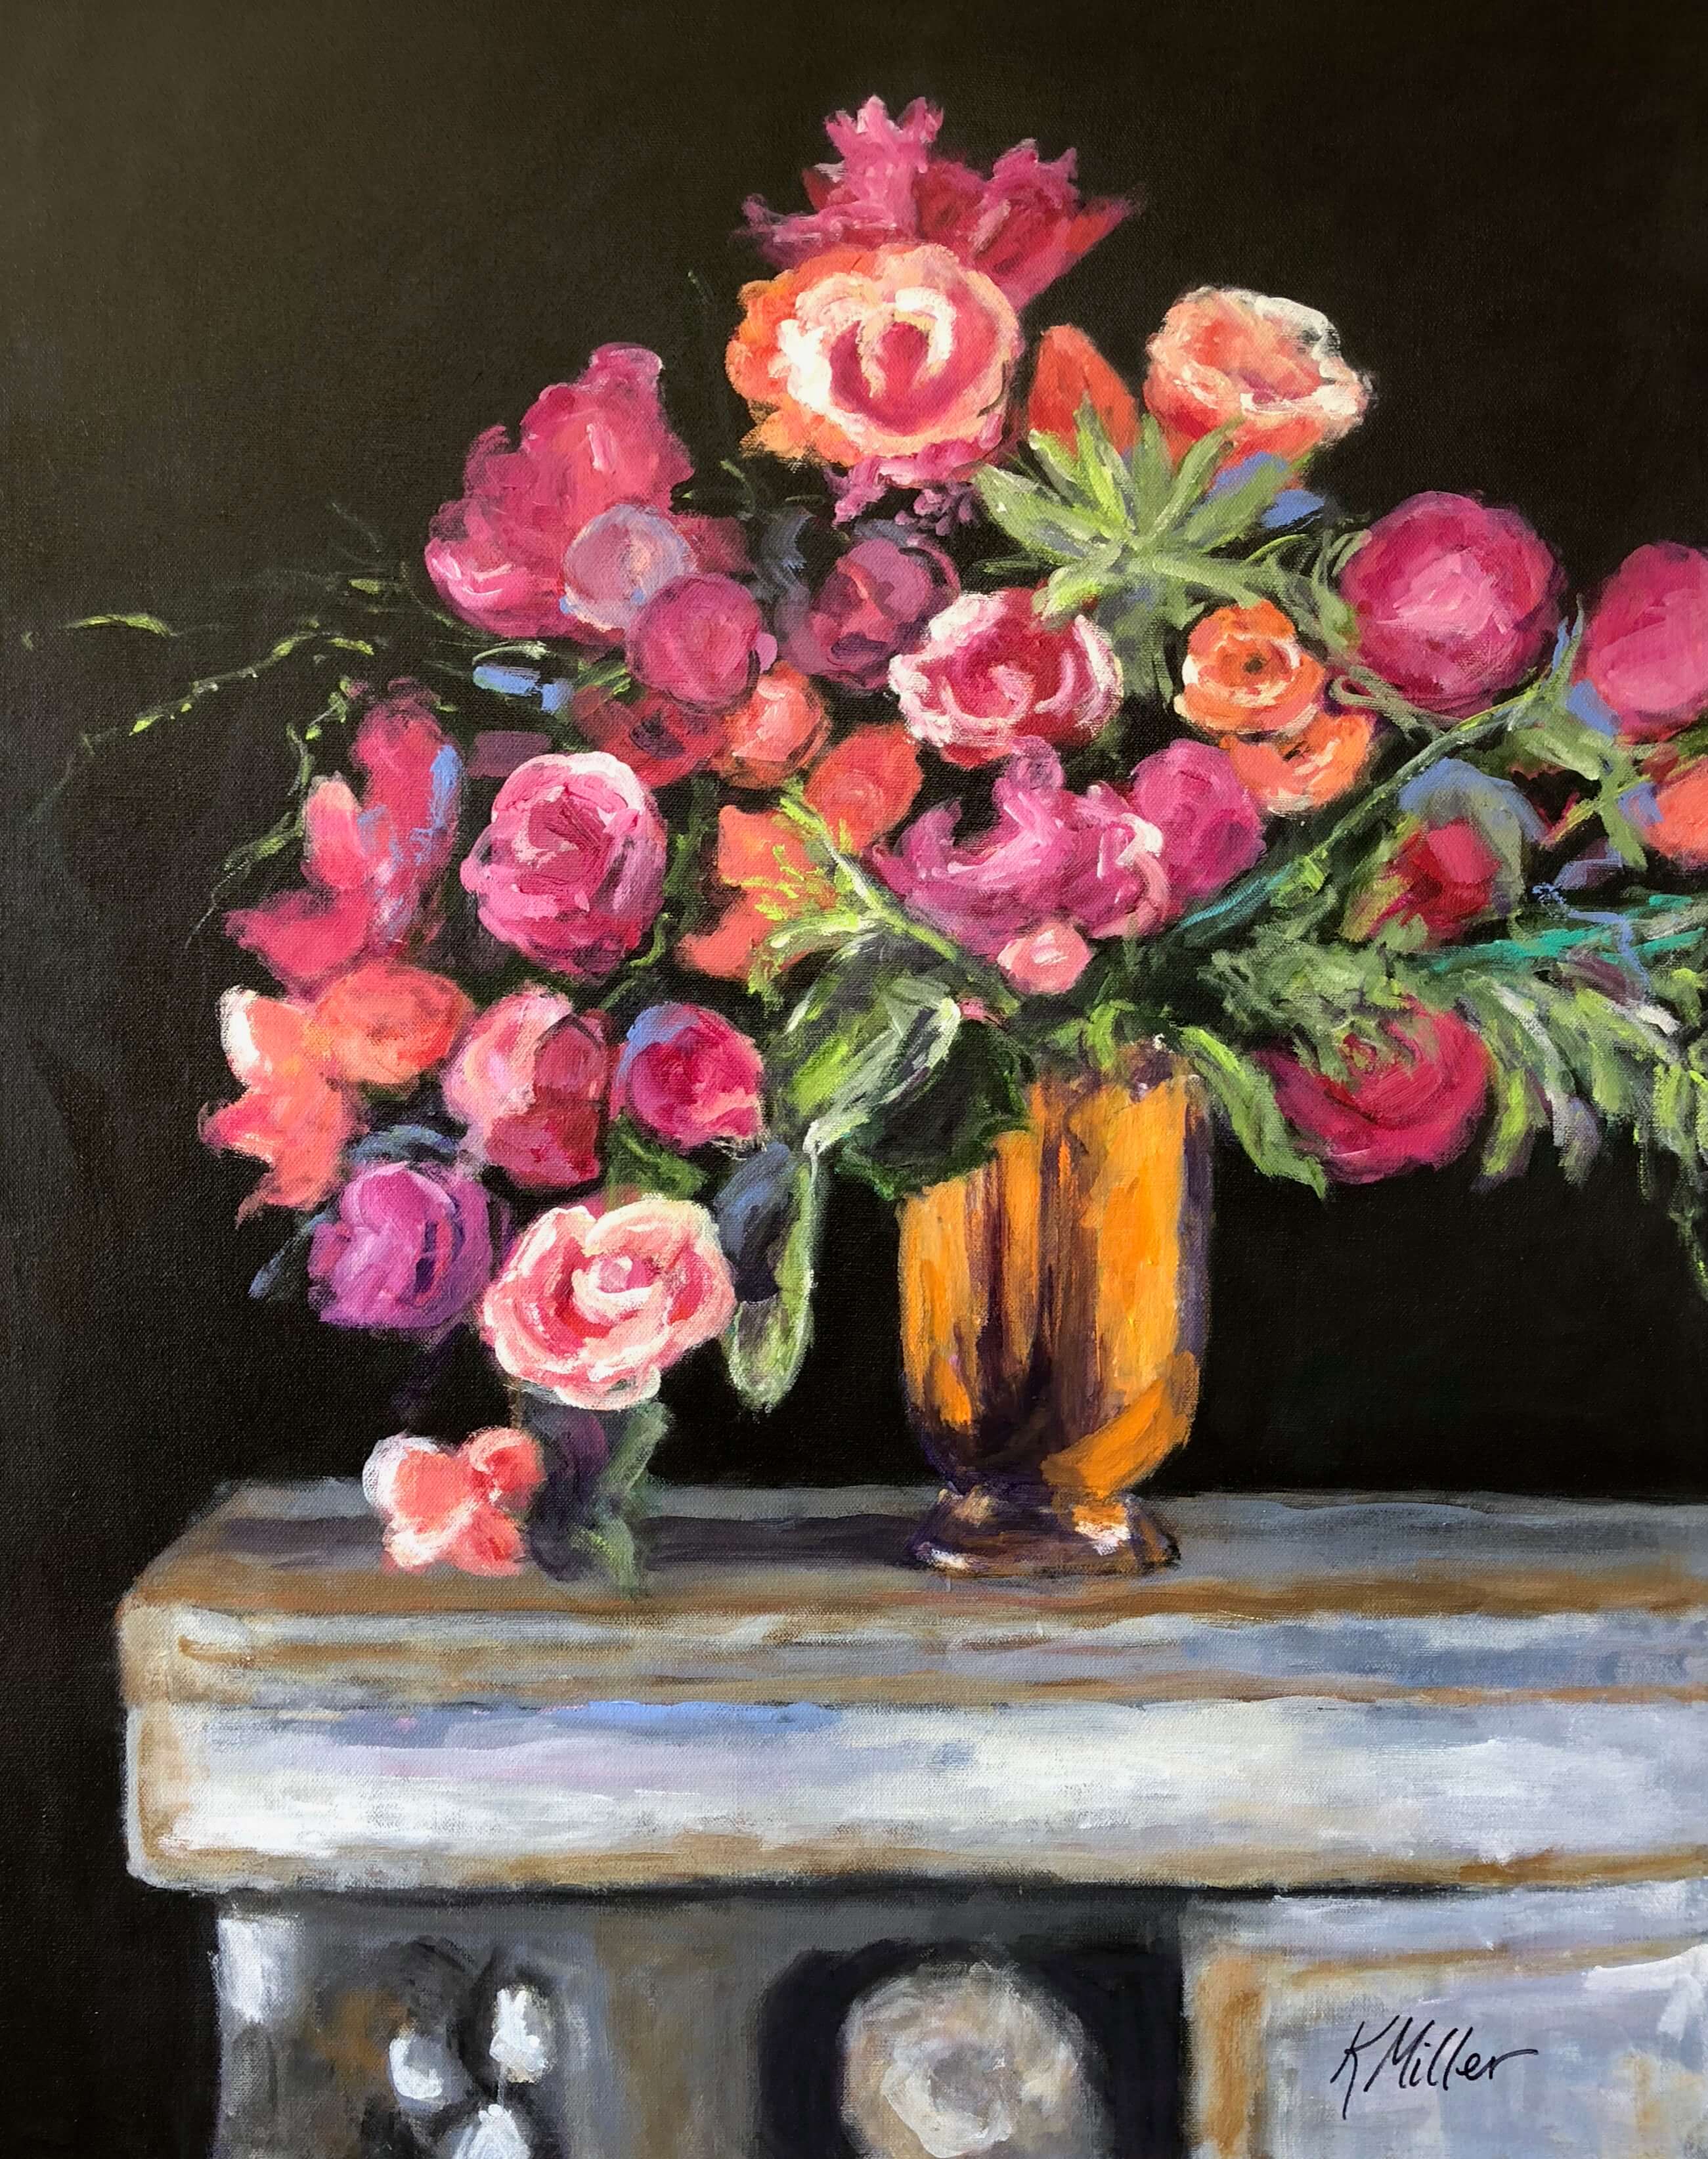 Anemones, Begonias and Peonies in Brass Vessel painting by Kathy Miller, inspired by Lewis Miller floral design